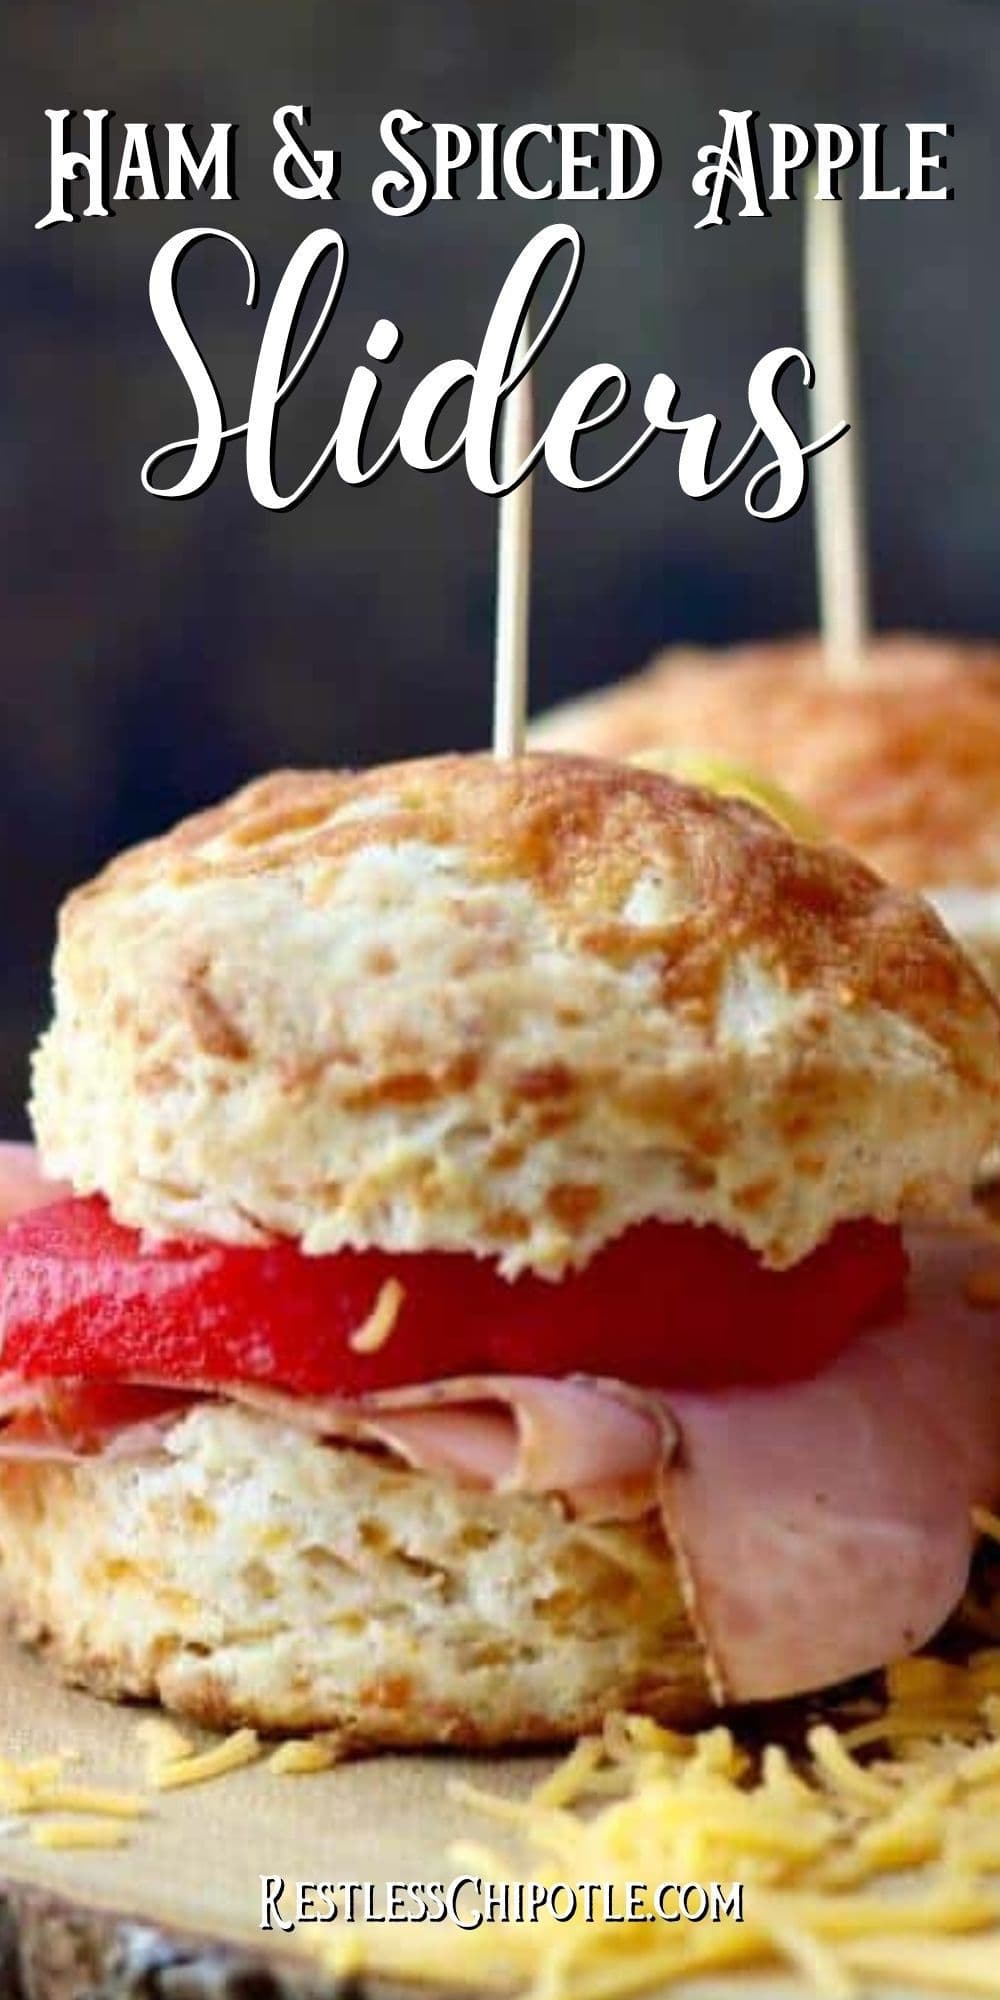 Country Ham Cheese Biscuits Recipe with Spiced Apples pic